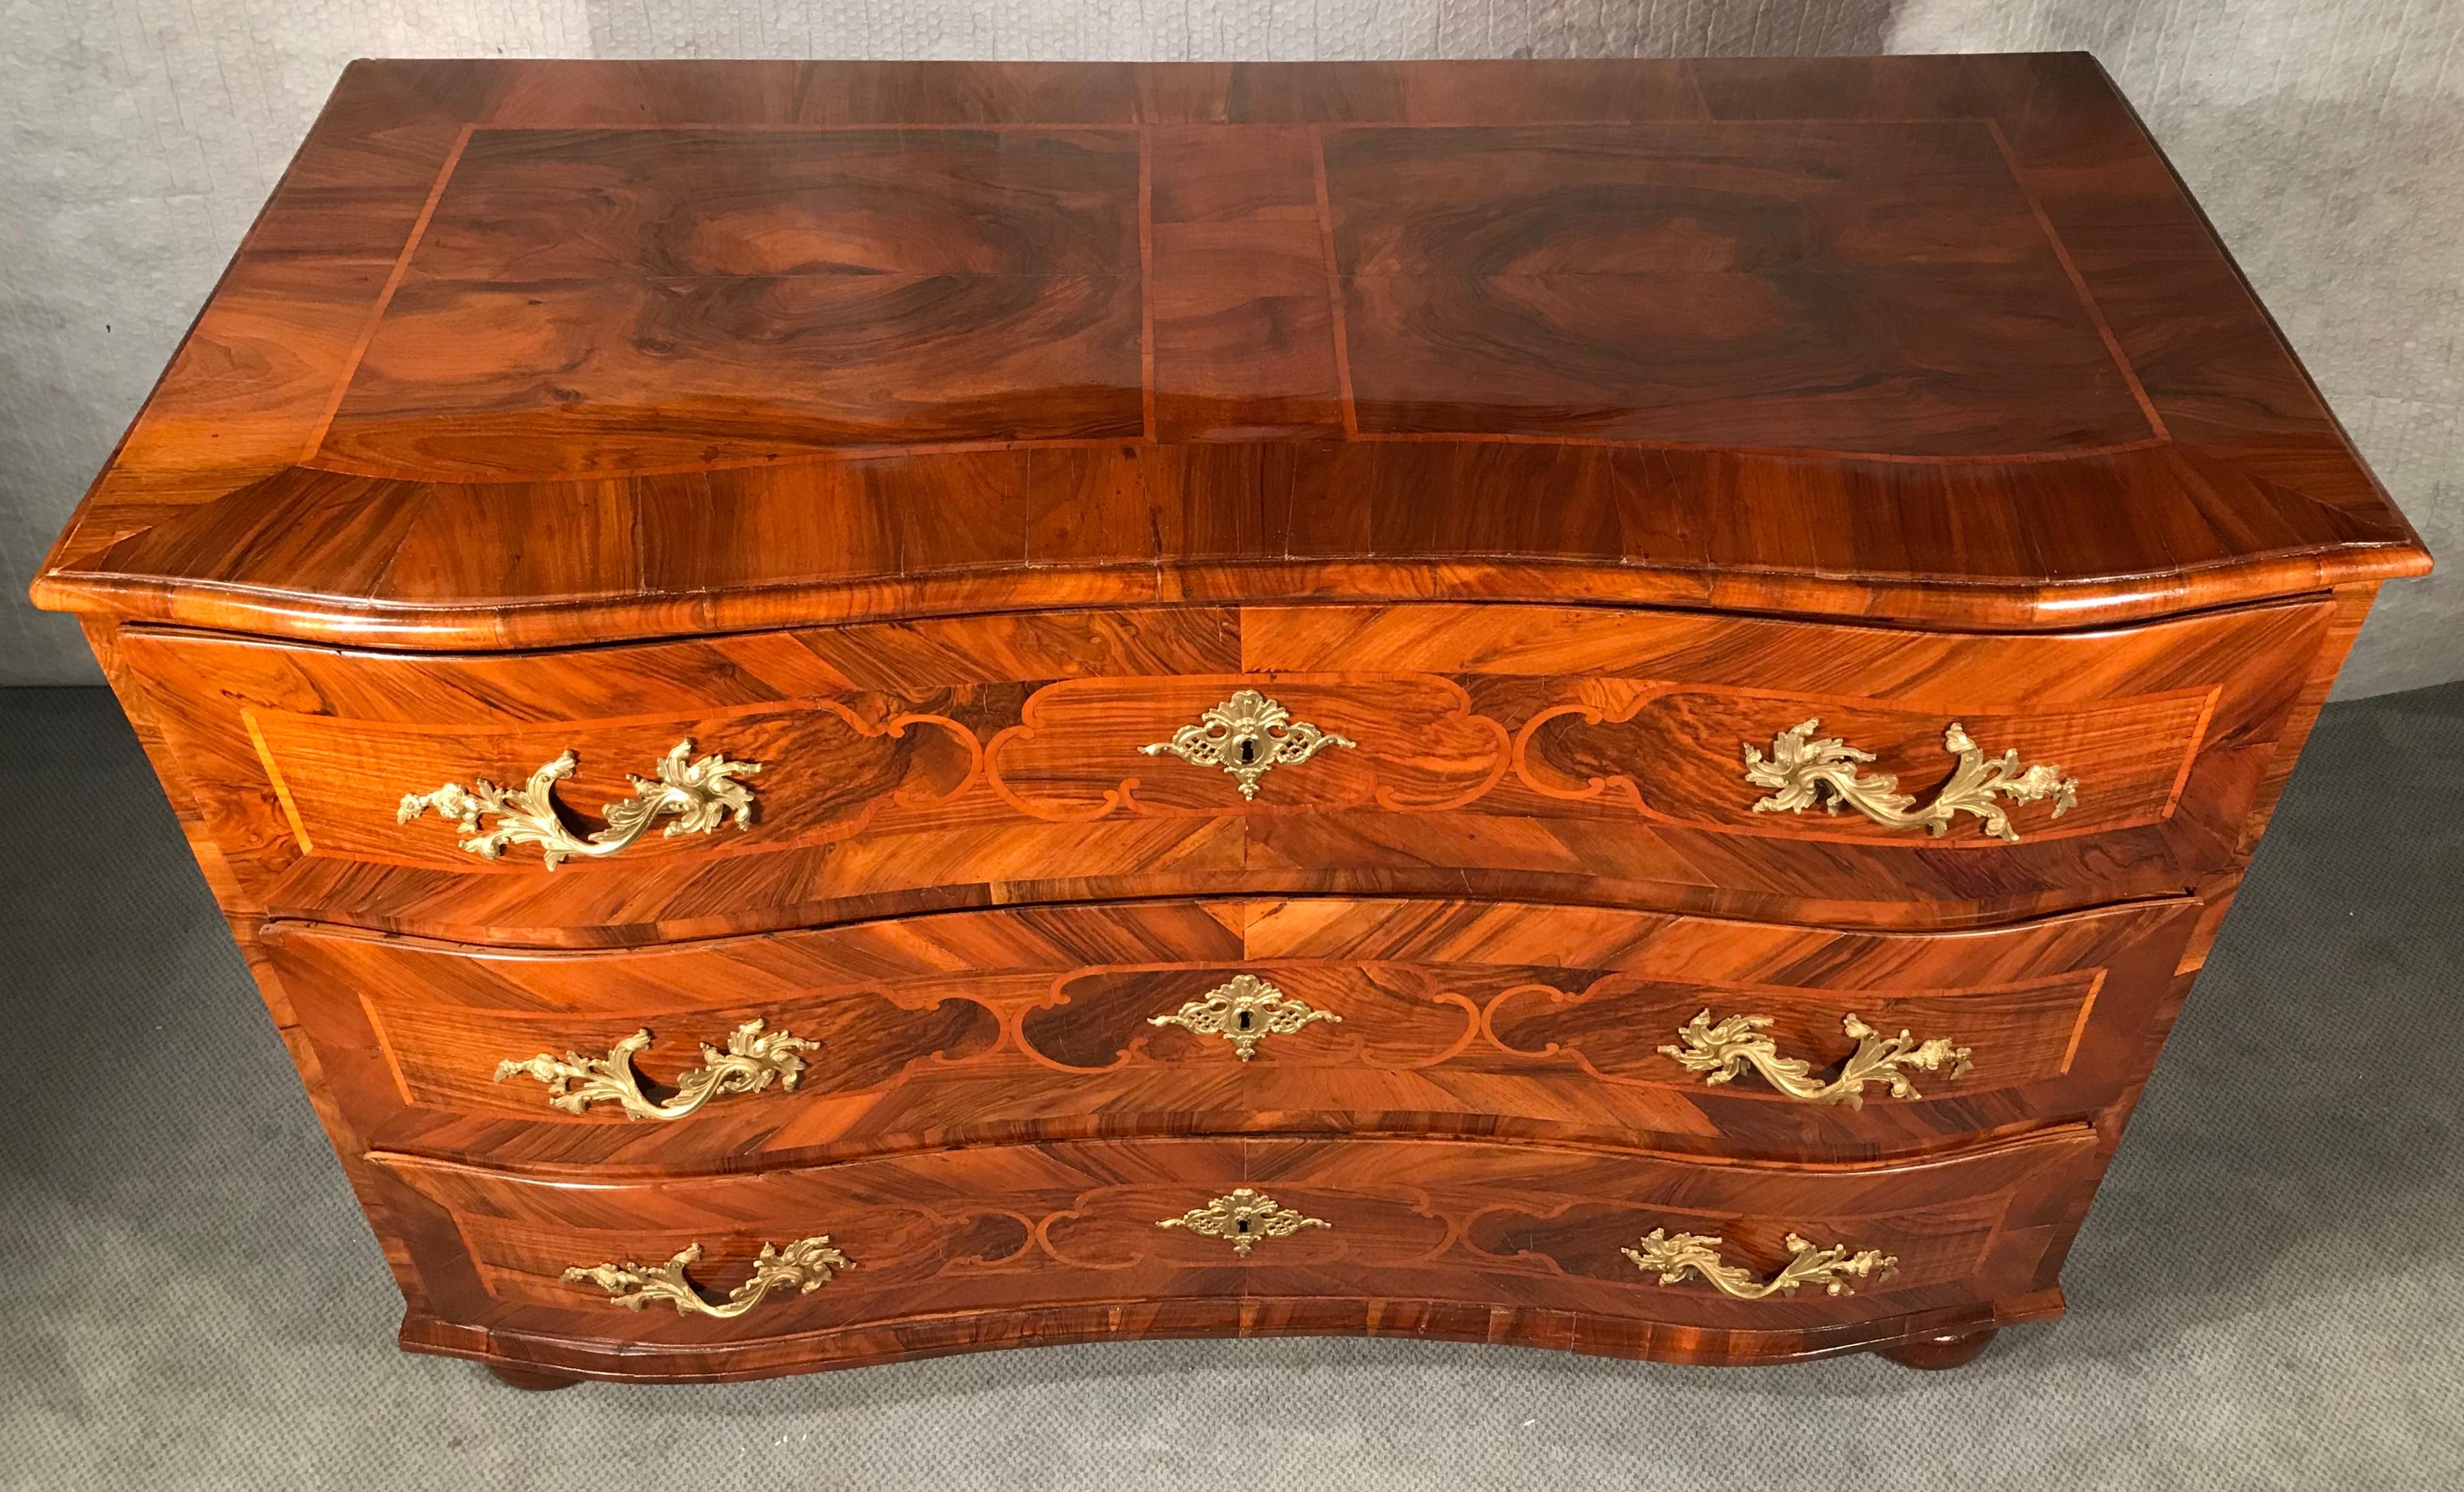 Outstanding south German Baroque chest of drawers, made, circa 1750. The cabinetmaker used different walnut grains and cherrywood for his marquetry. Beautiful brass fittings. The commode is in very good refinished condition. It has been French